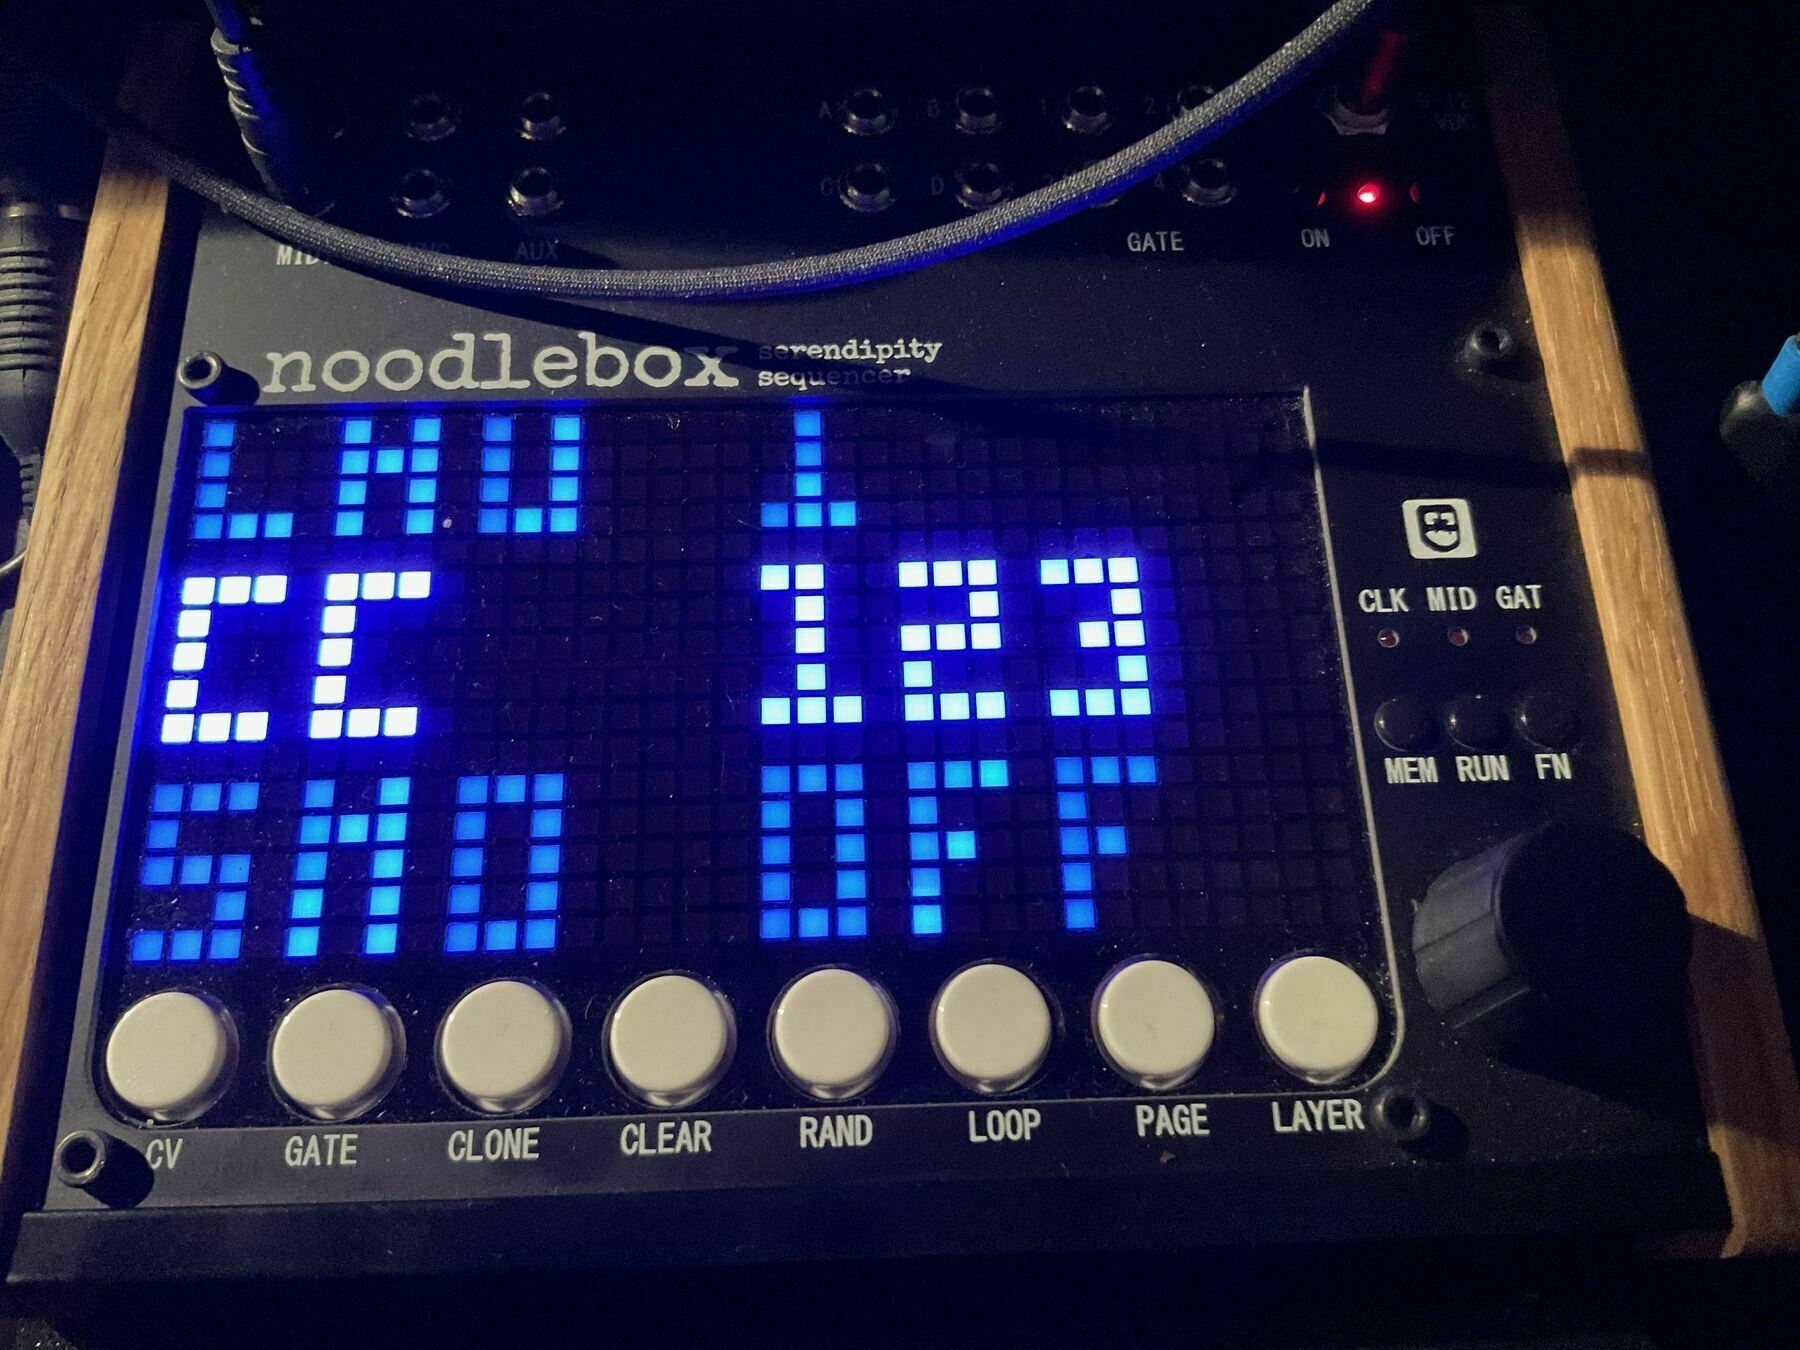 A MIDI sequencer displaying the Control Code 123 which stops everything AKA Panic